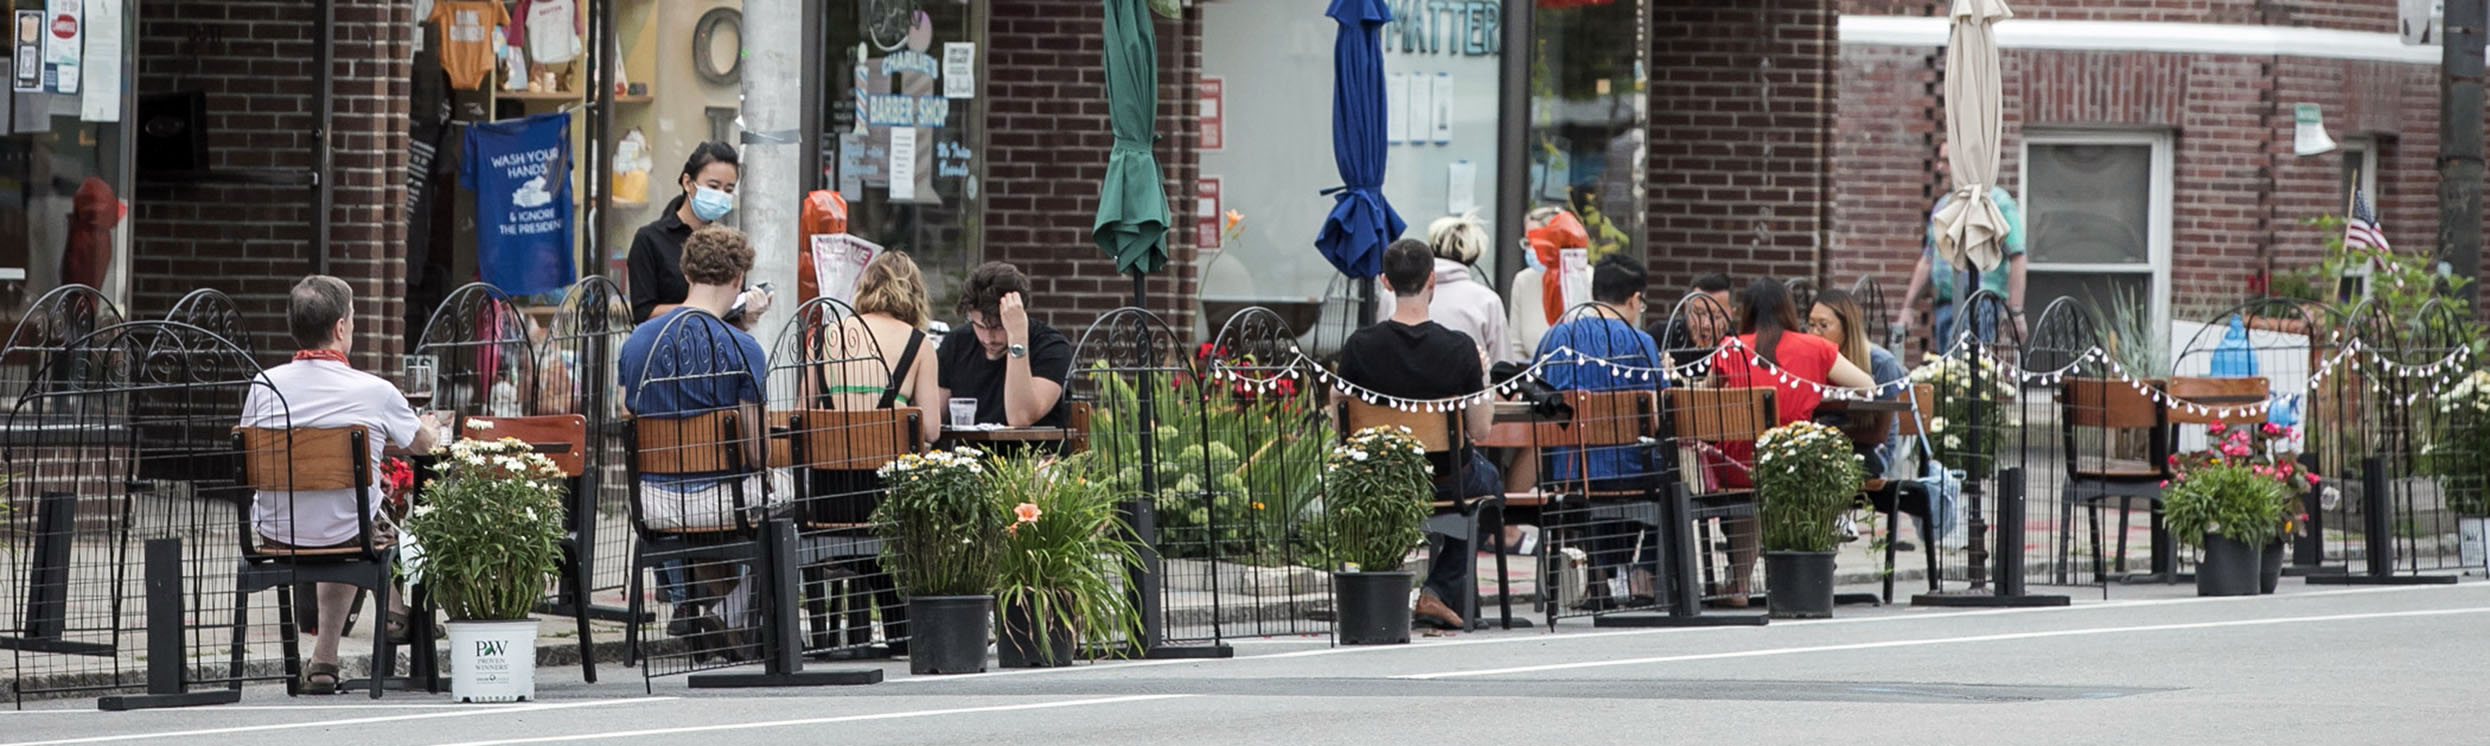 people sitting outside at tables on the street